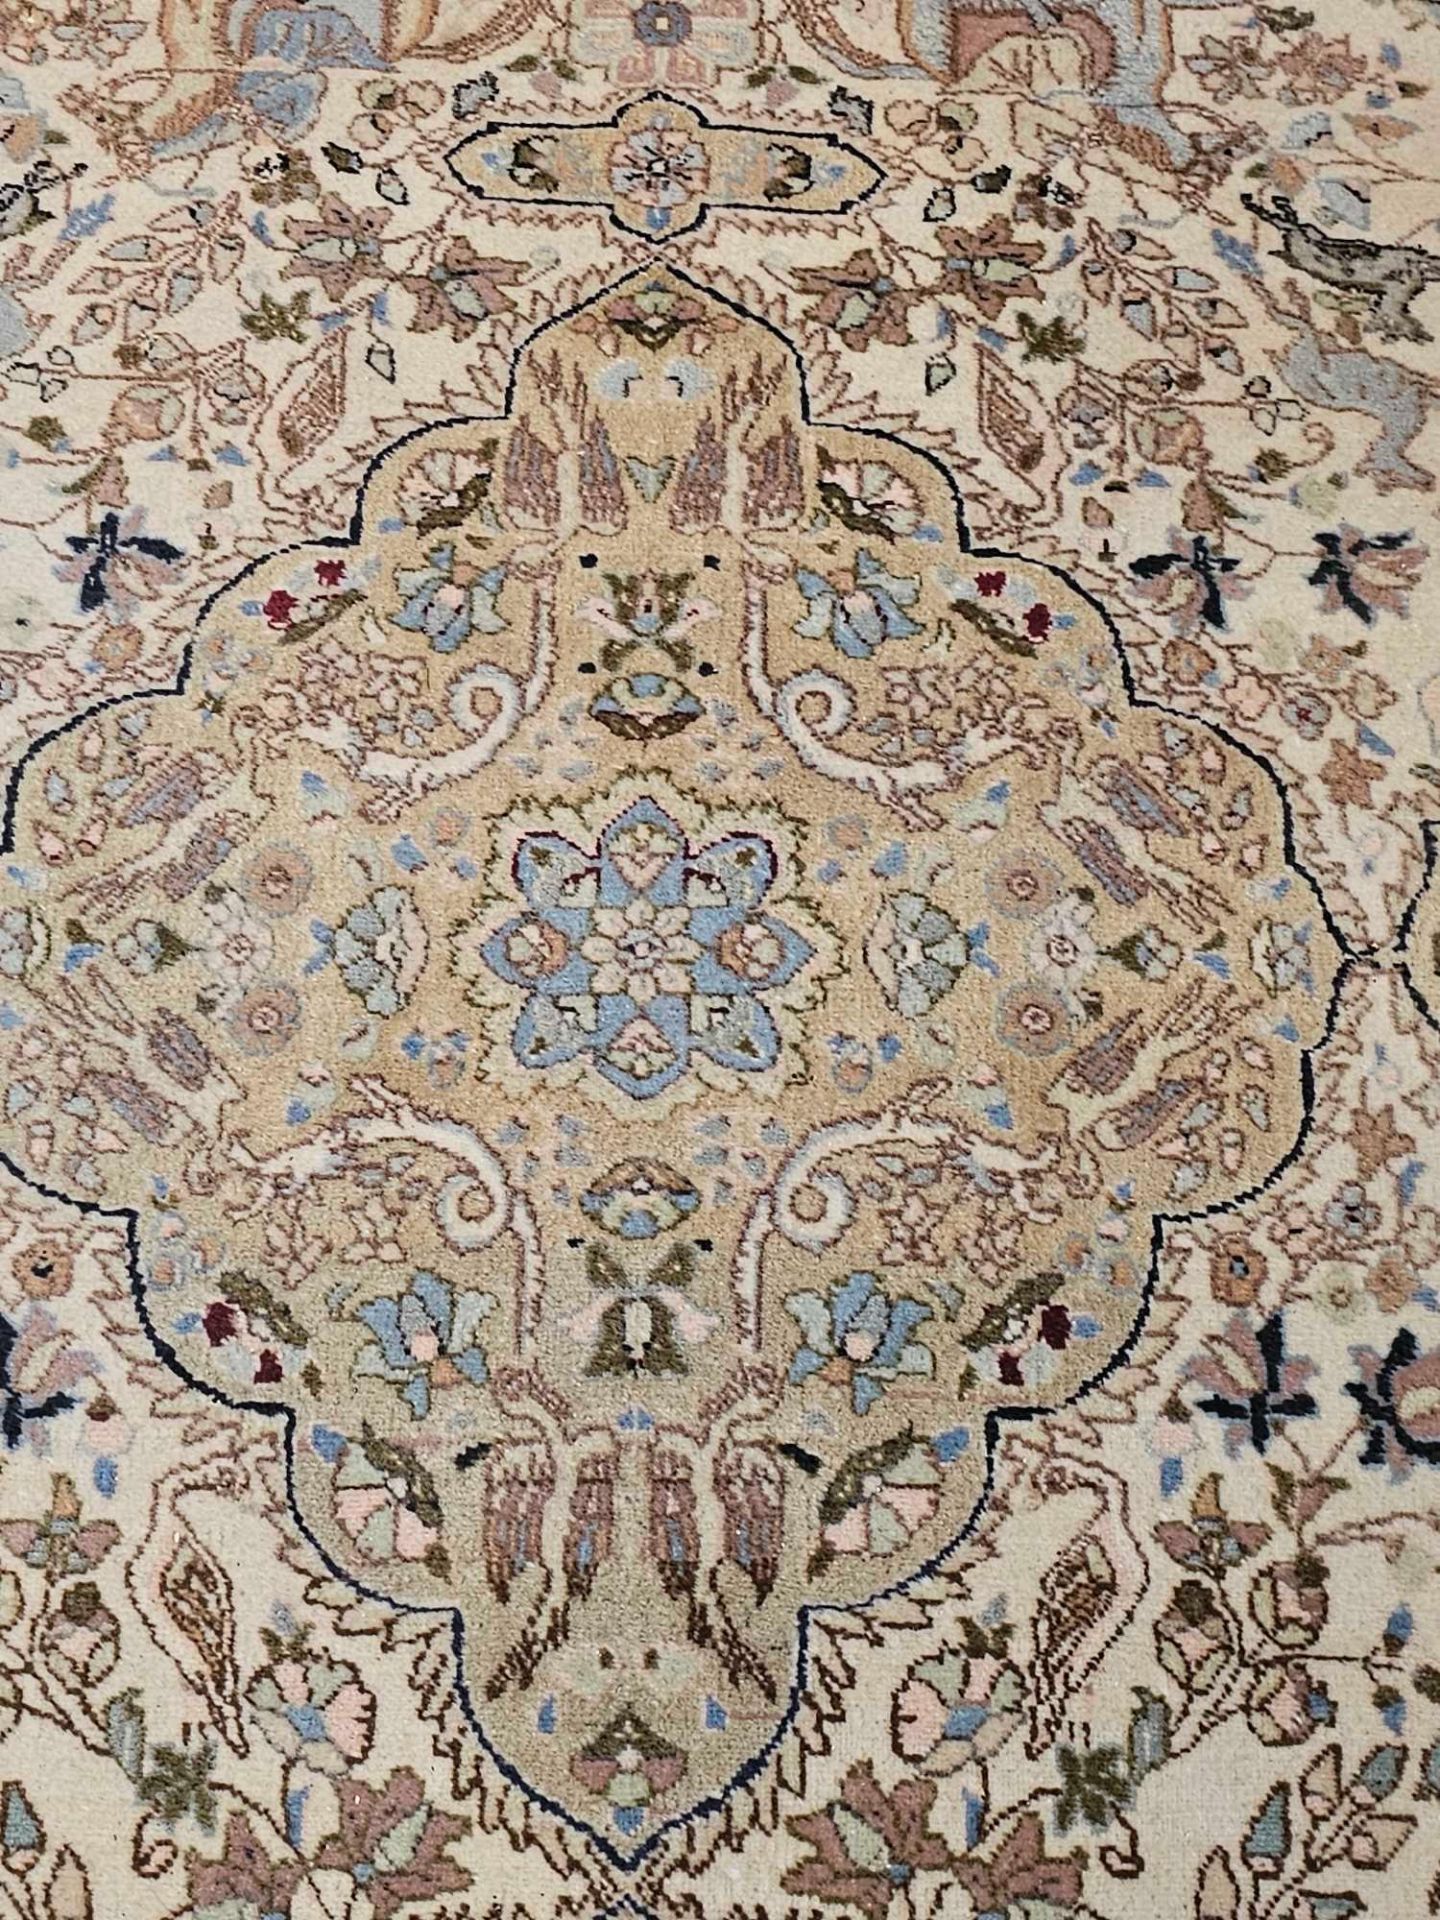 A Persian Patterned Rug The Ivory Field With Lozenge Medallions And Scrolled Spandrels With A - Image 4 of 6